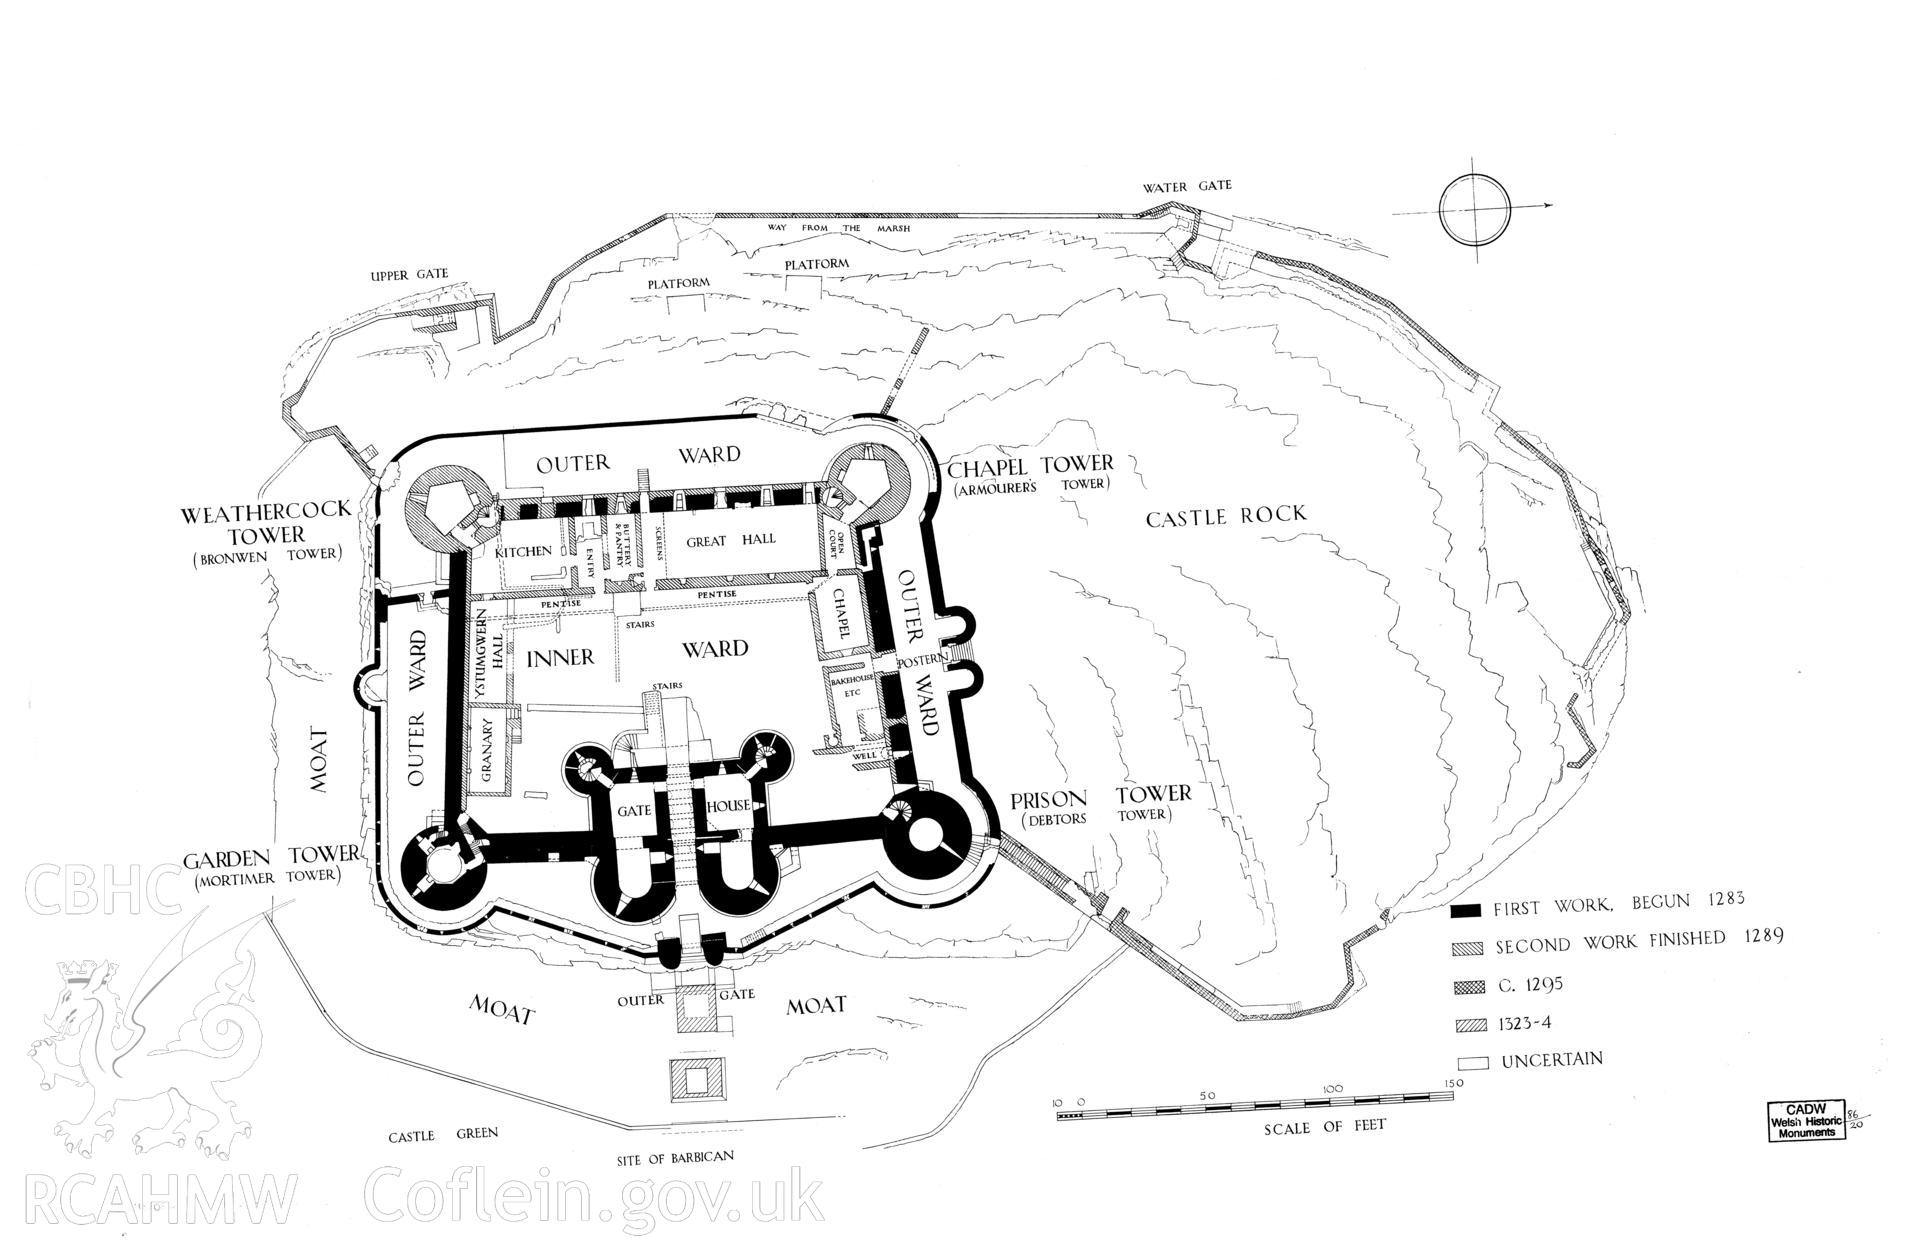 Cadw guardianship monument drawing of Harlech Castle. General plan, 4 periods. Cadw Ref. No:86/20. Scale 1:192.